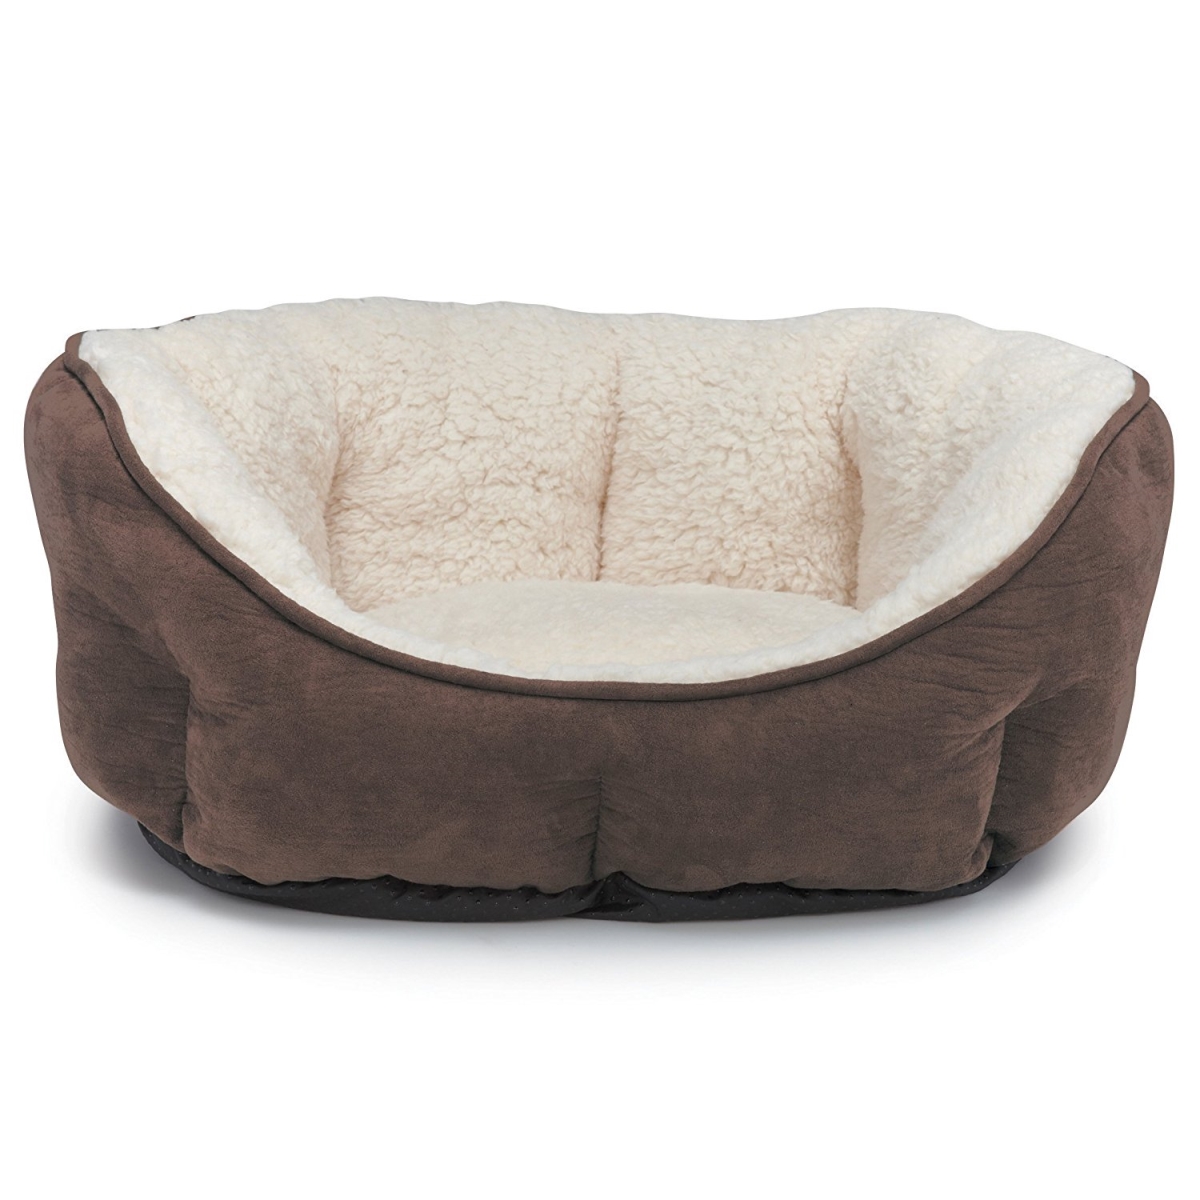 Picture of Slumber Pet ThermaPet Bolster Bed 18-Inch Brown  - ZW9709 18 25